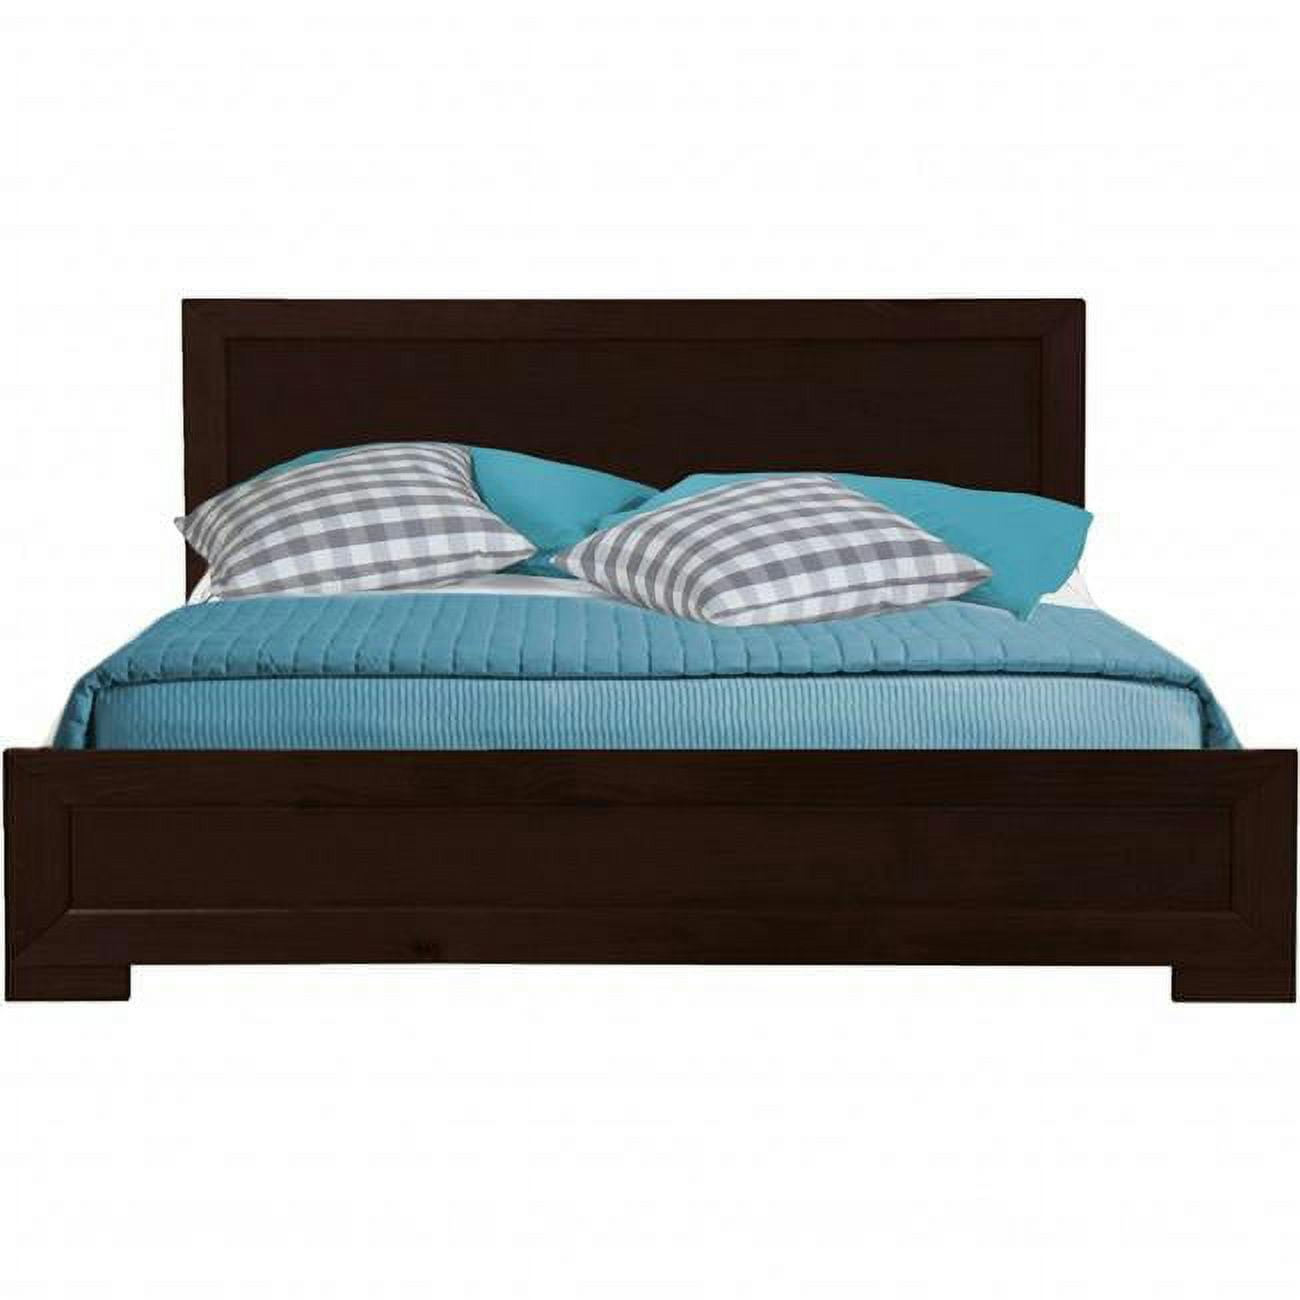 Elegant Espresso Queen Platform Bed with Wood Frame and Headboard